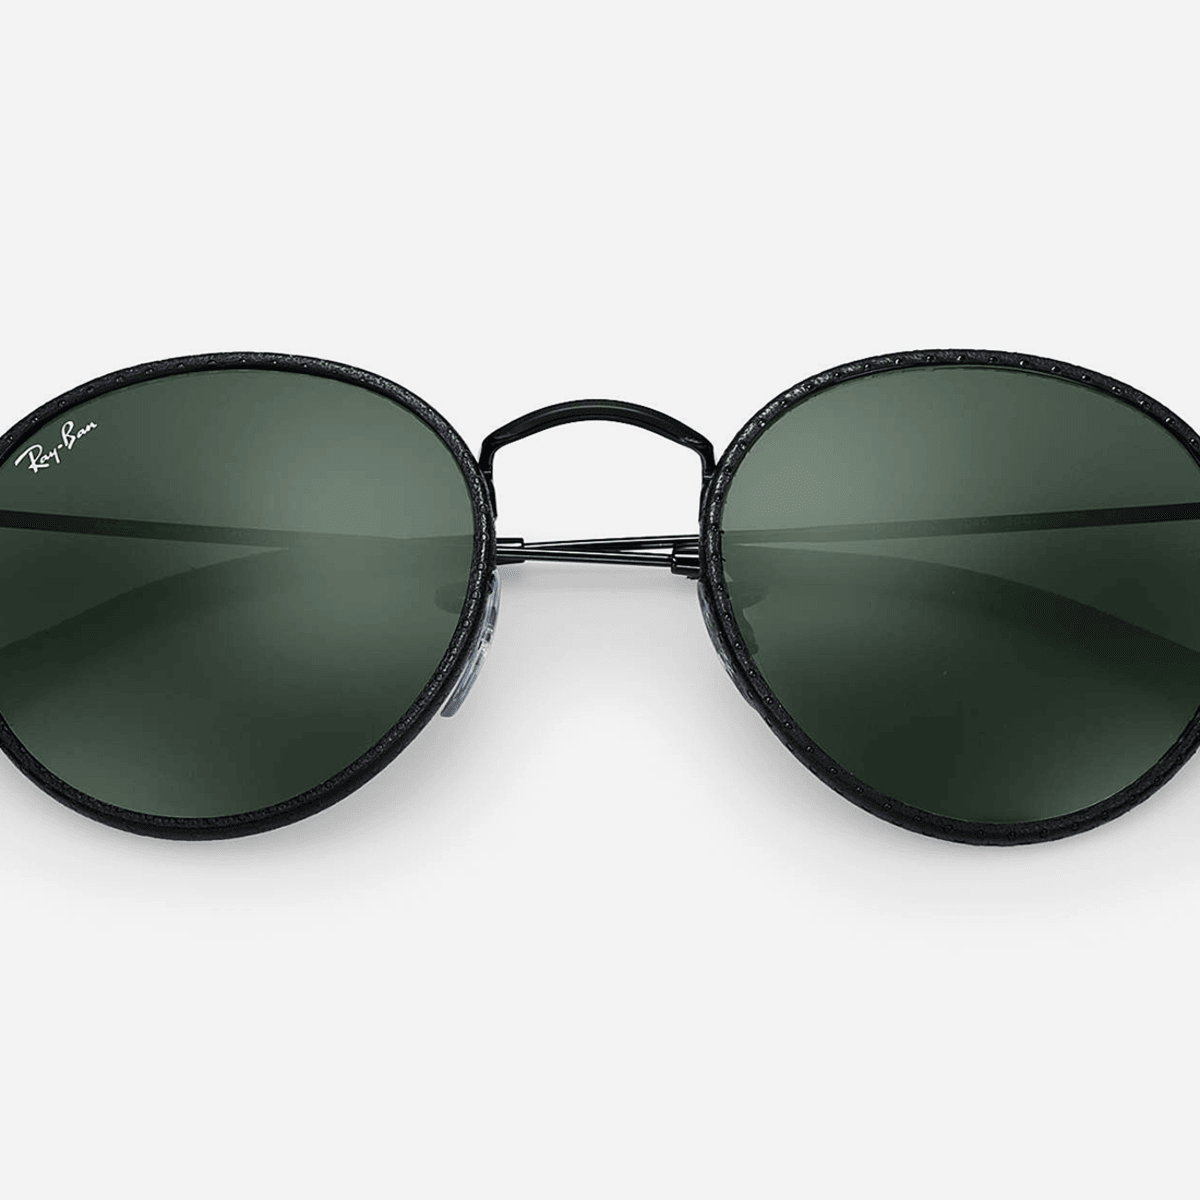 Ray-Ban Upgrades the Round Craft Sunglasses With Hints of Leather - Airows